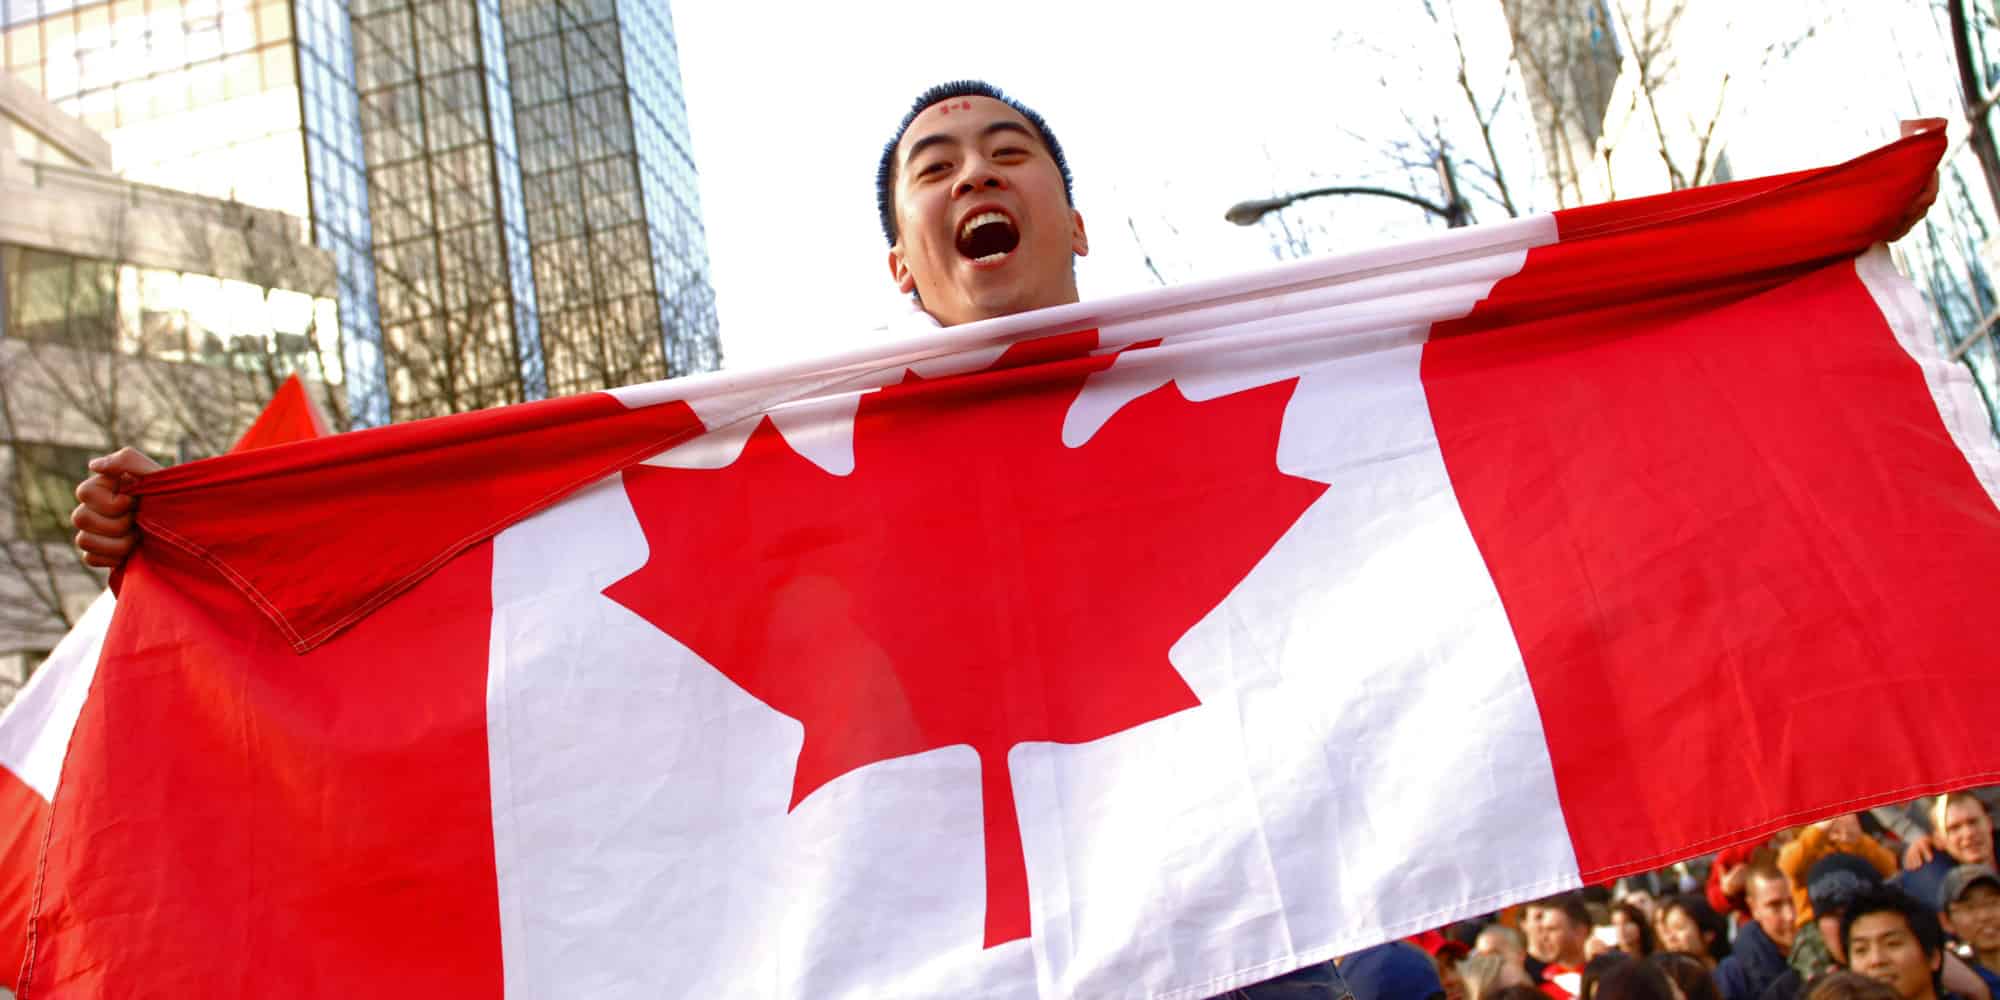 Temporary Residents Will be given extend their stay in Canada